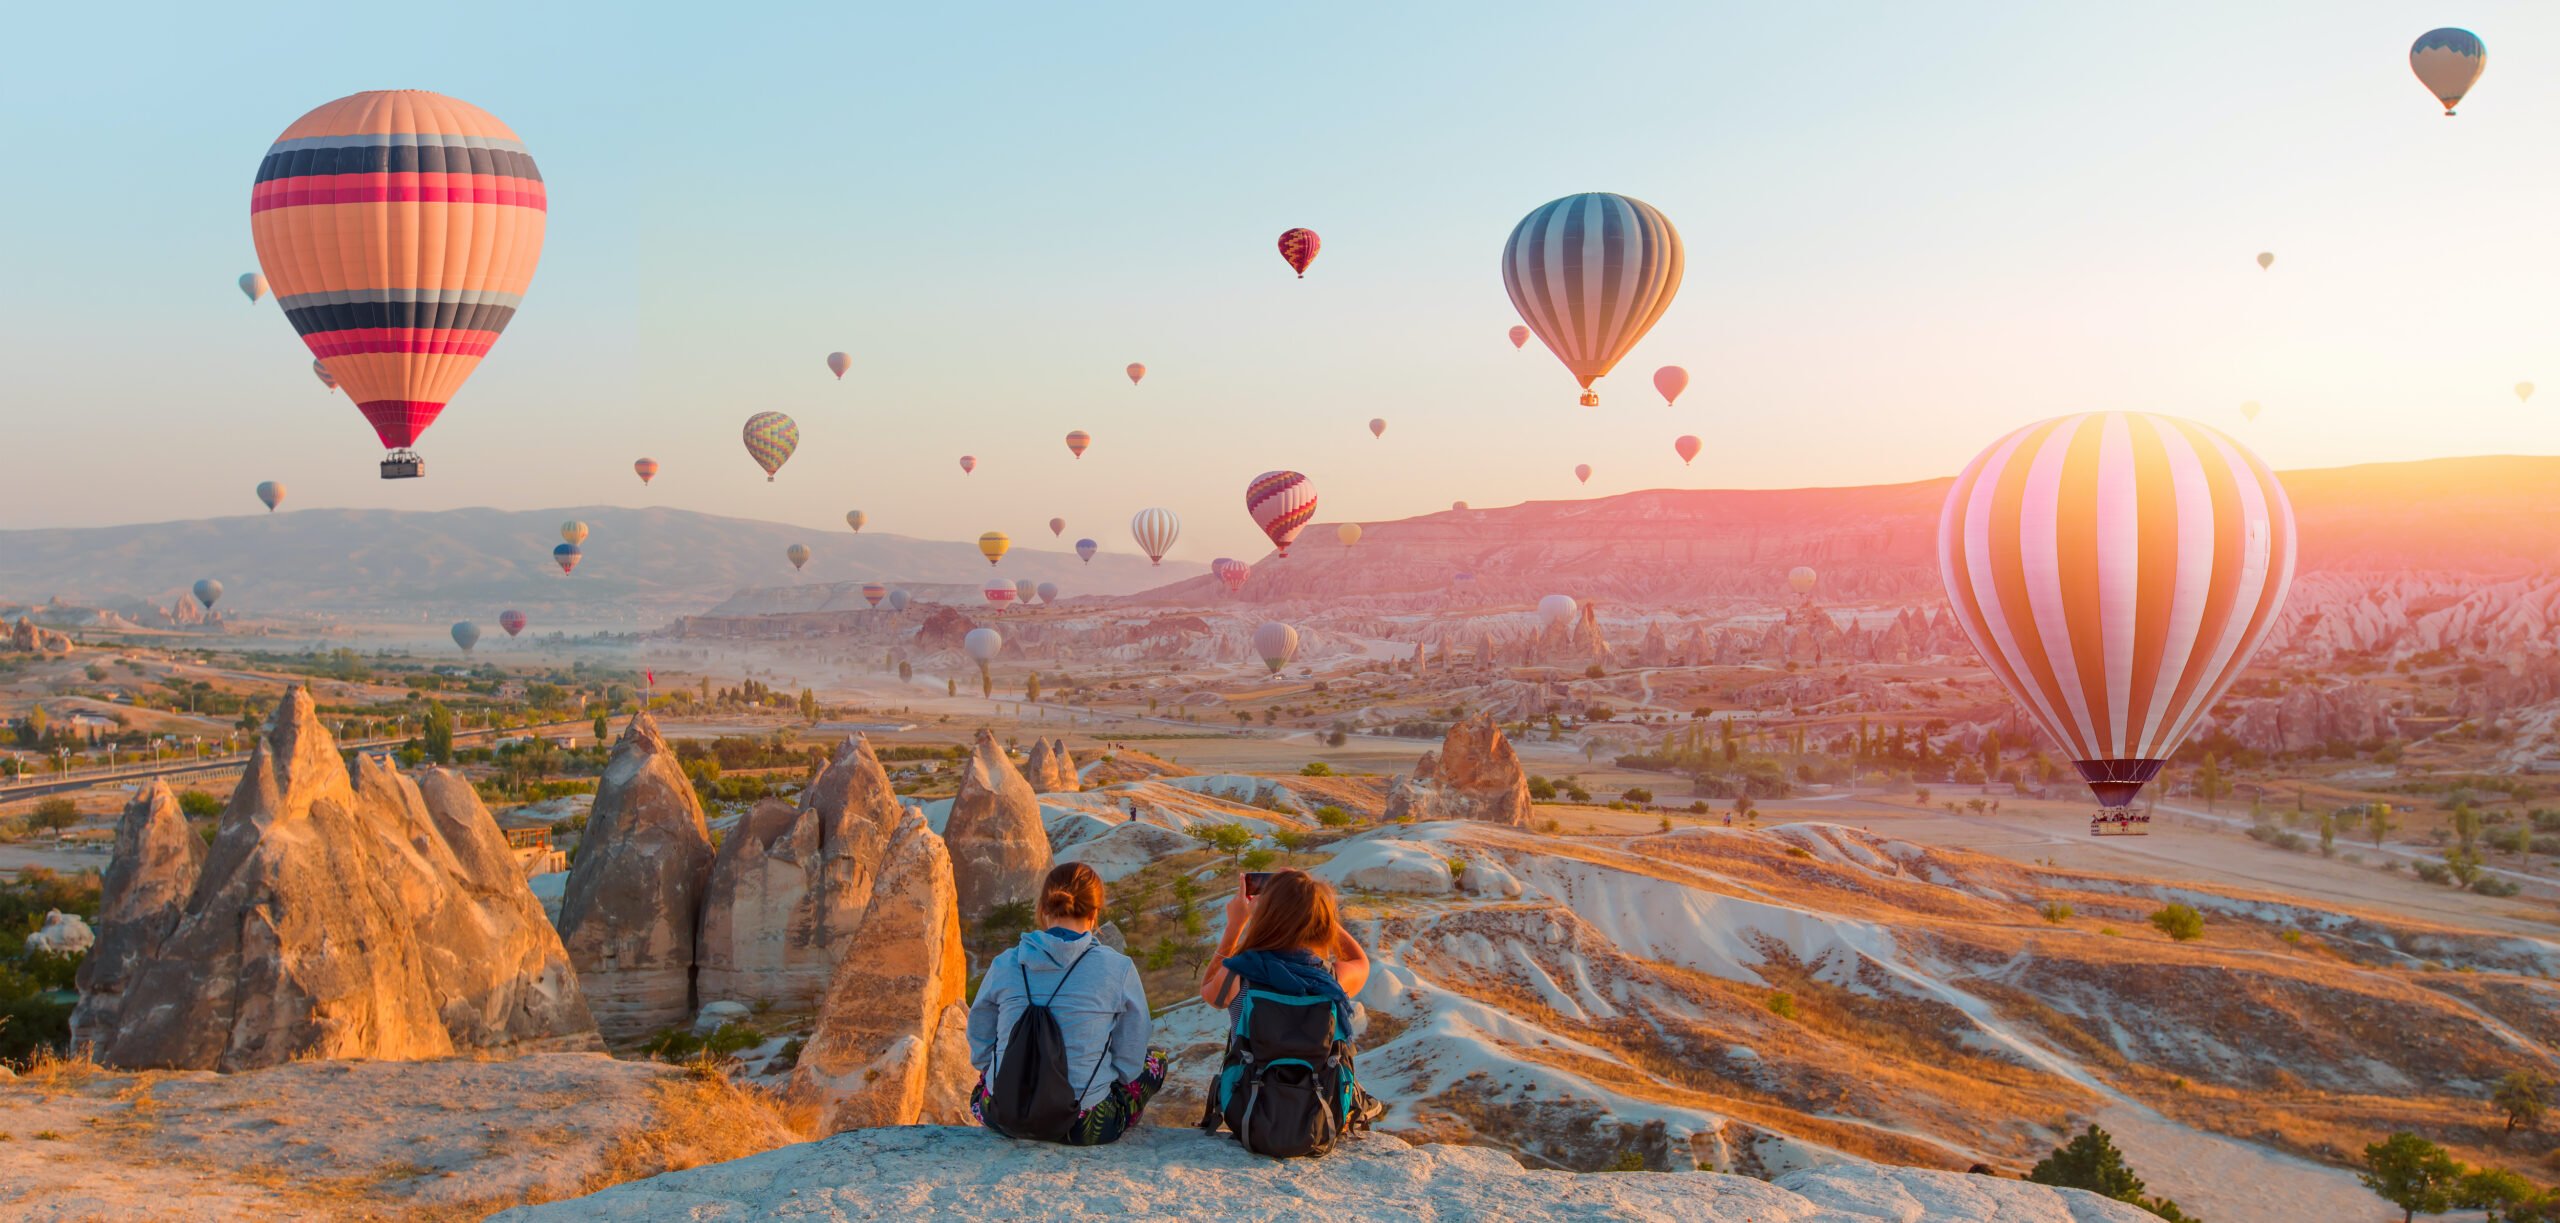 Where To Stay In Cappadocia